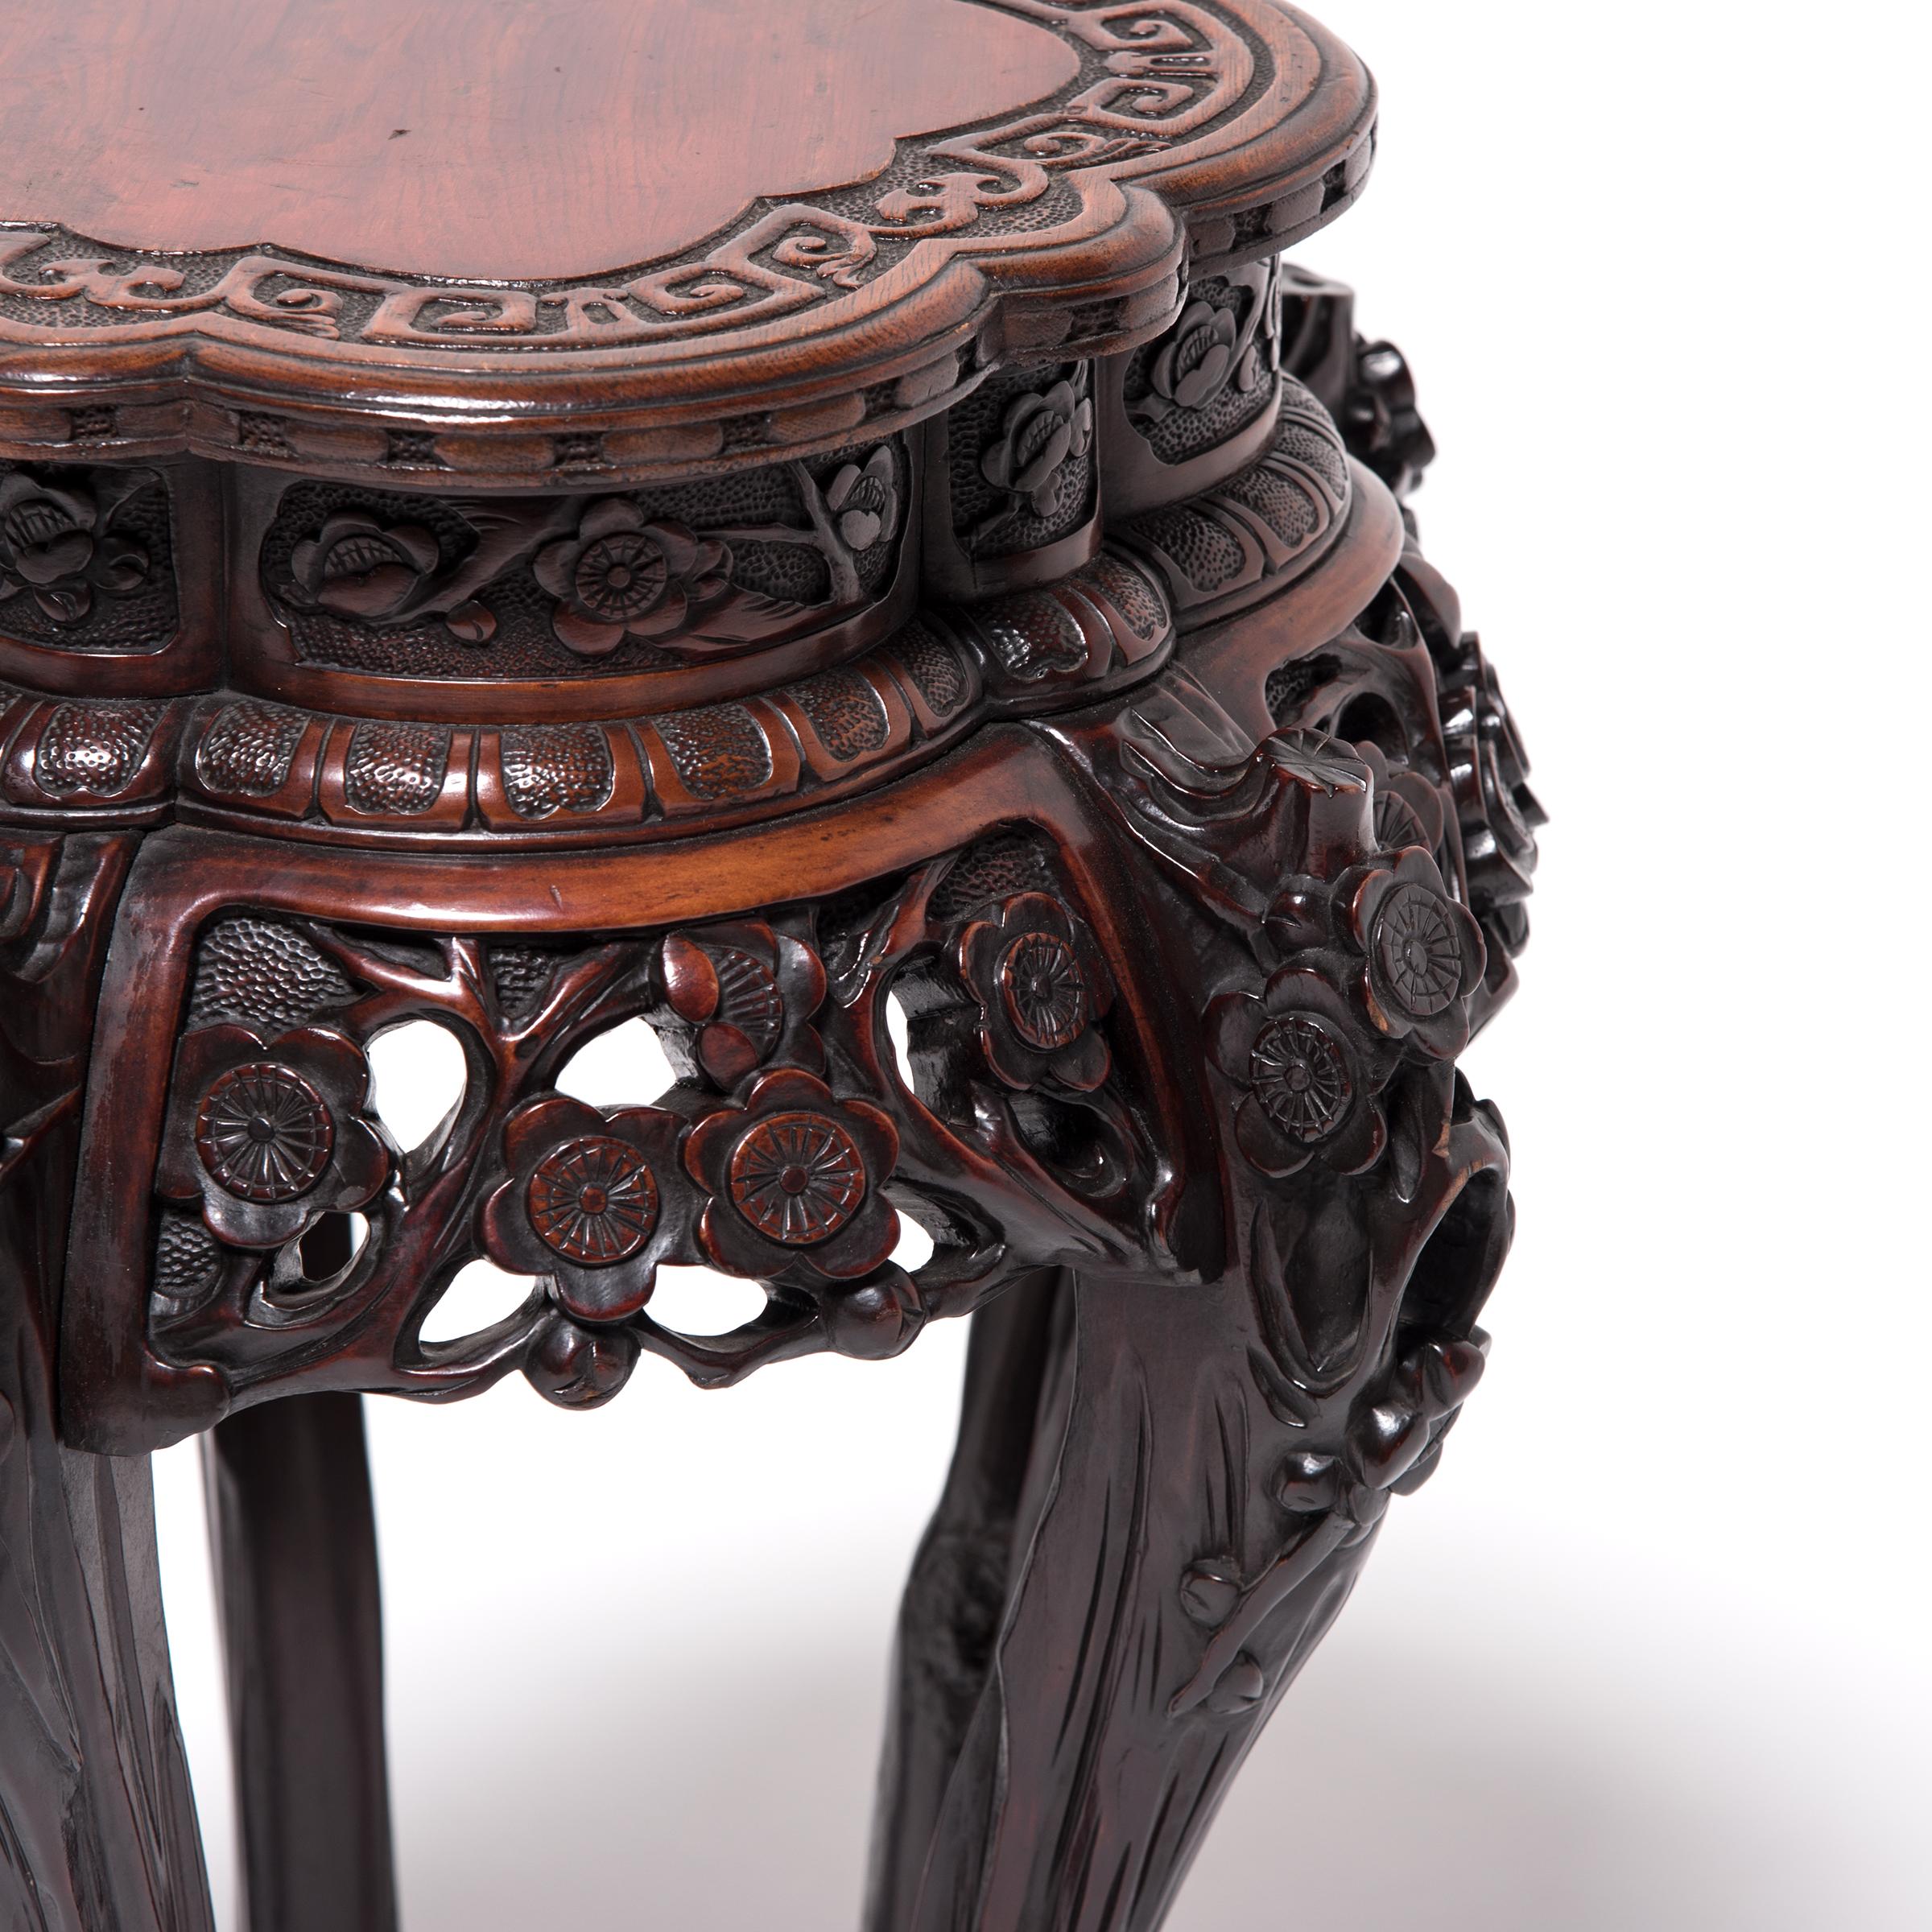 Hand-Carved Ornate Japanese Side Table, c. 1850 For Sale